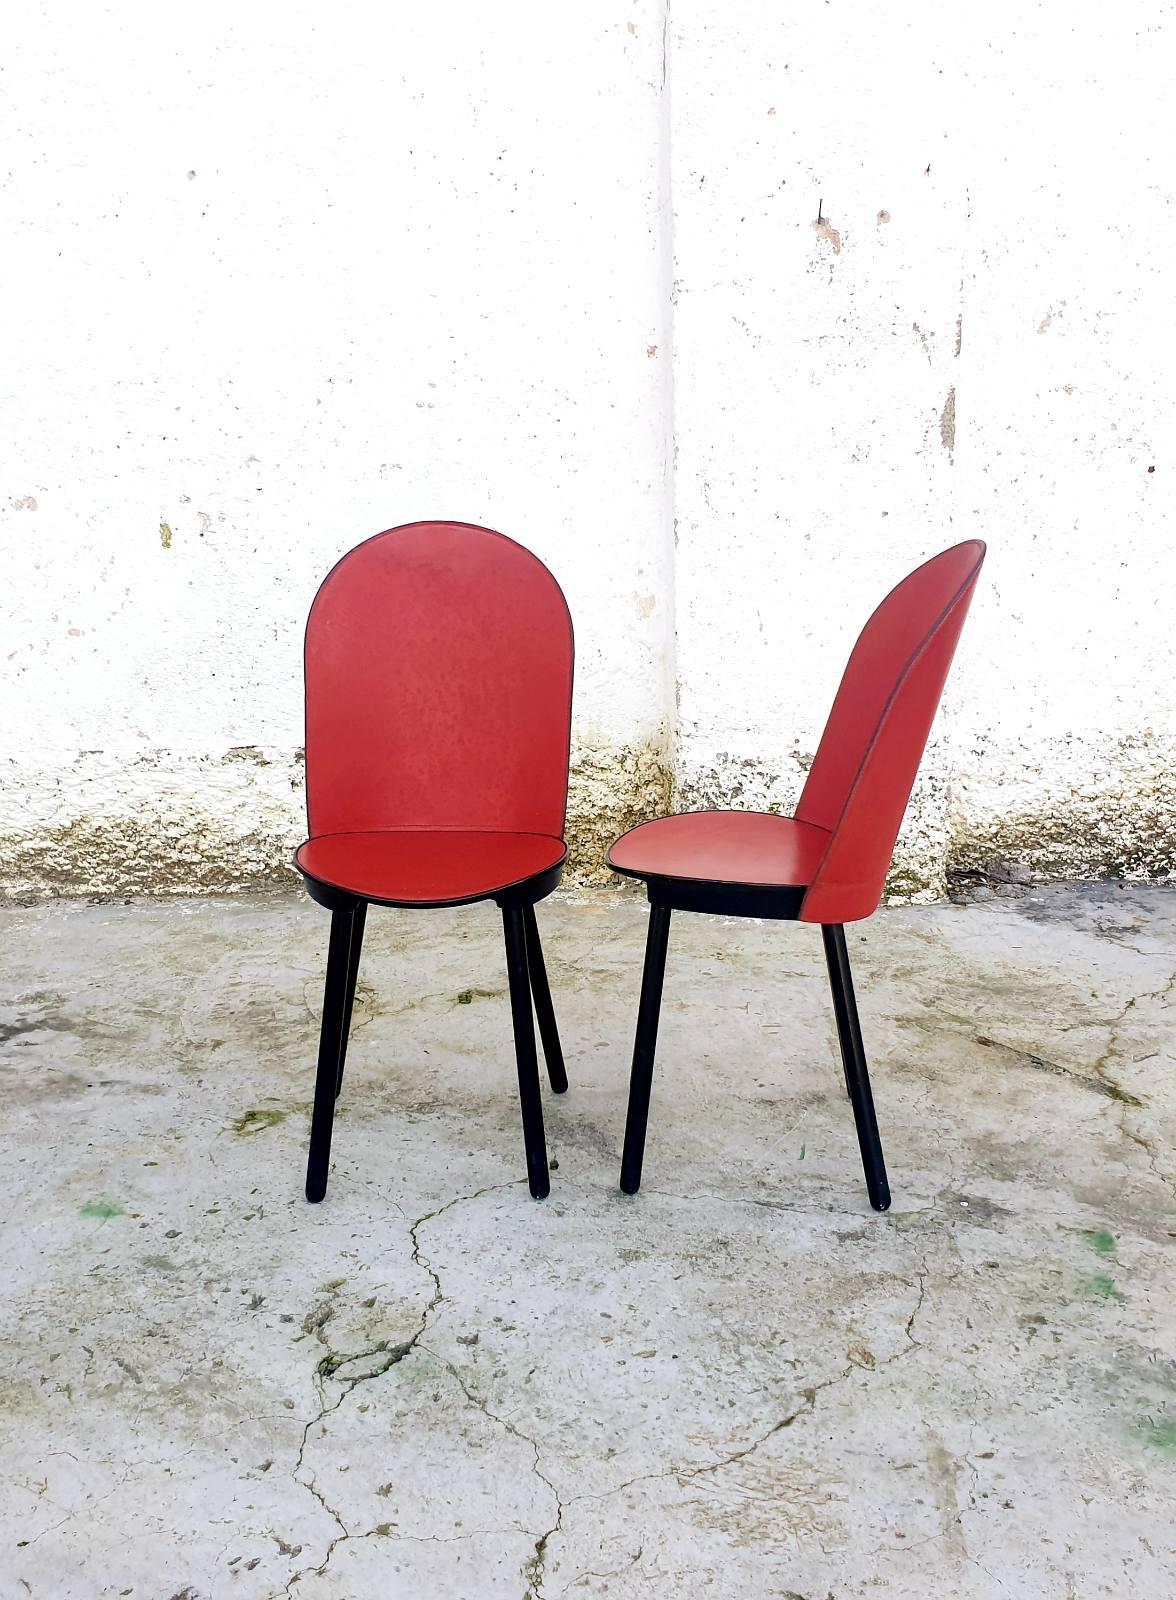 Vintage Dining Chairs were designed and produced by Italian brand Zanotta in '80s.
Chairs are labeled. 